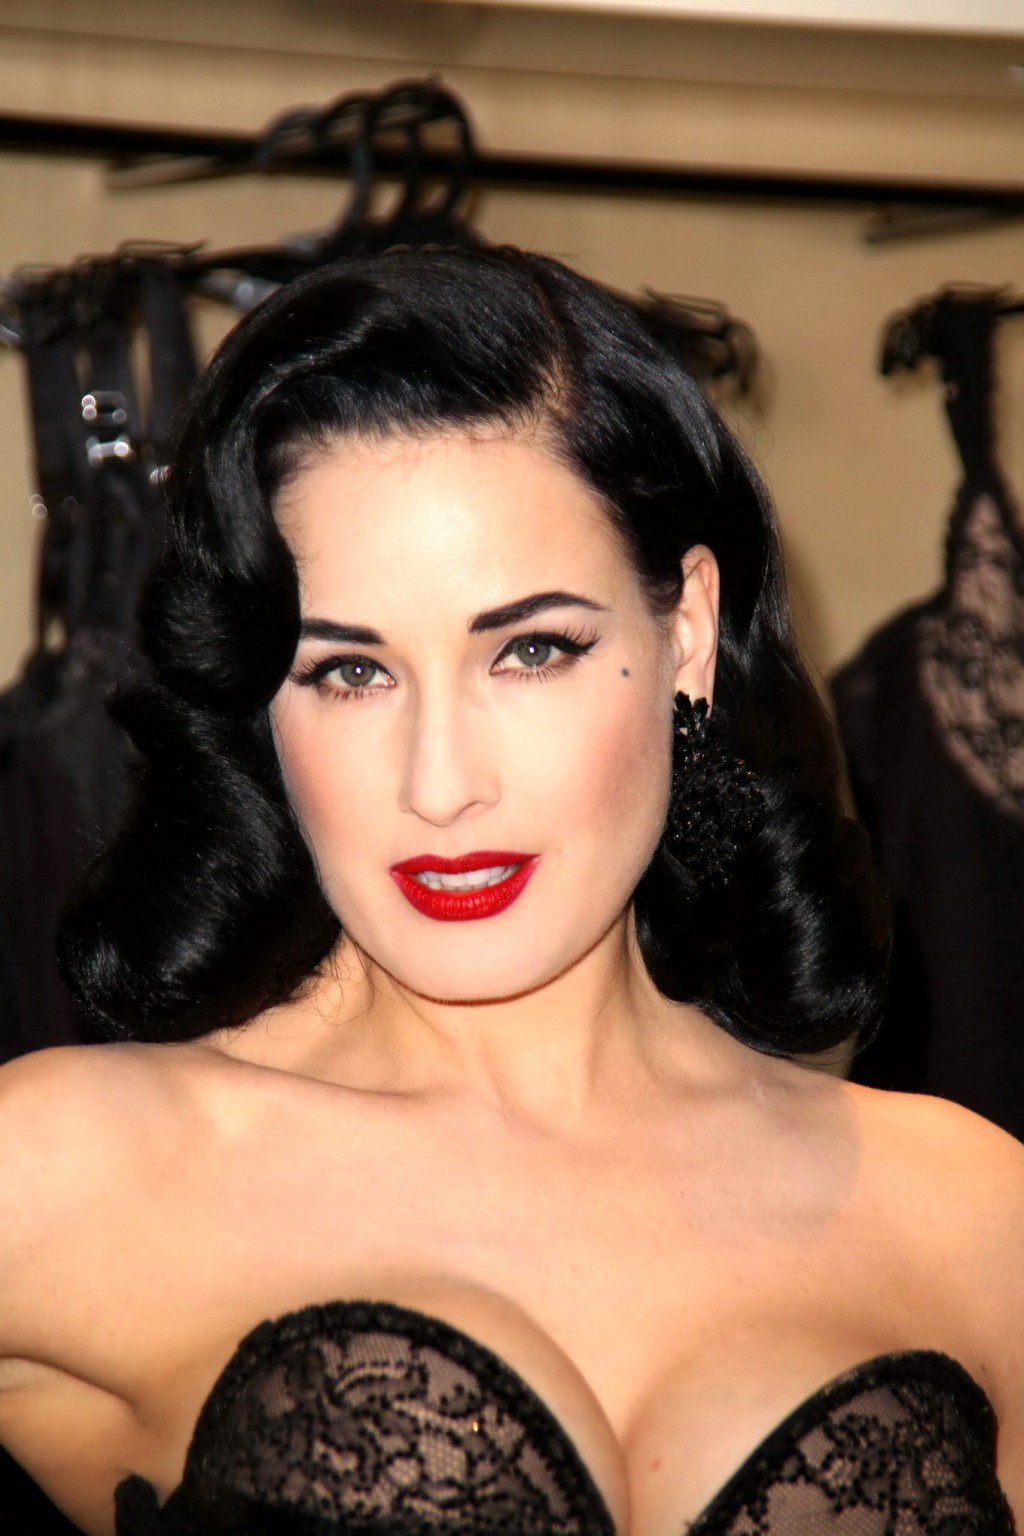 Dita von Teese showing huge cleavage at her lingerie line launch in NYC